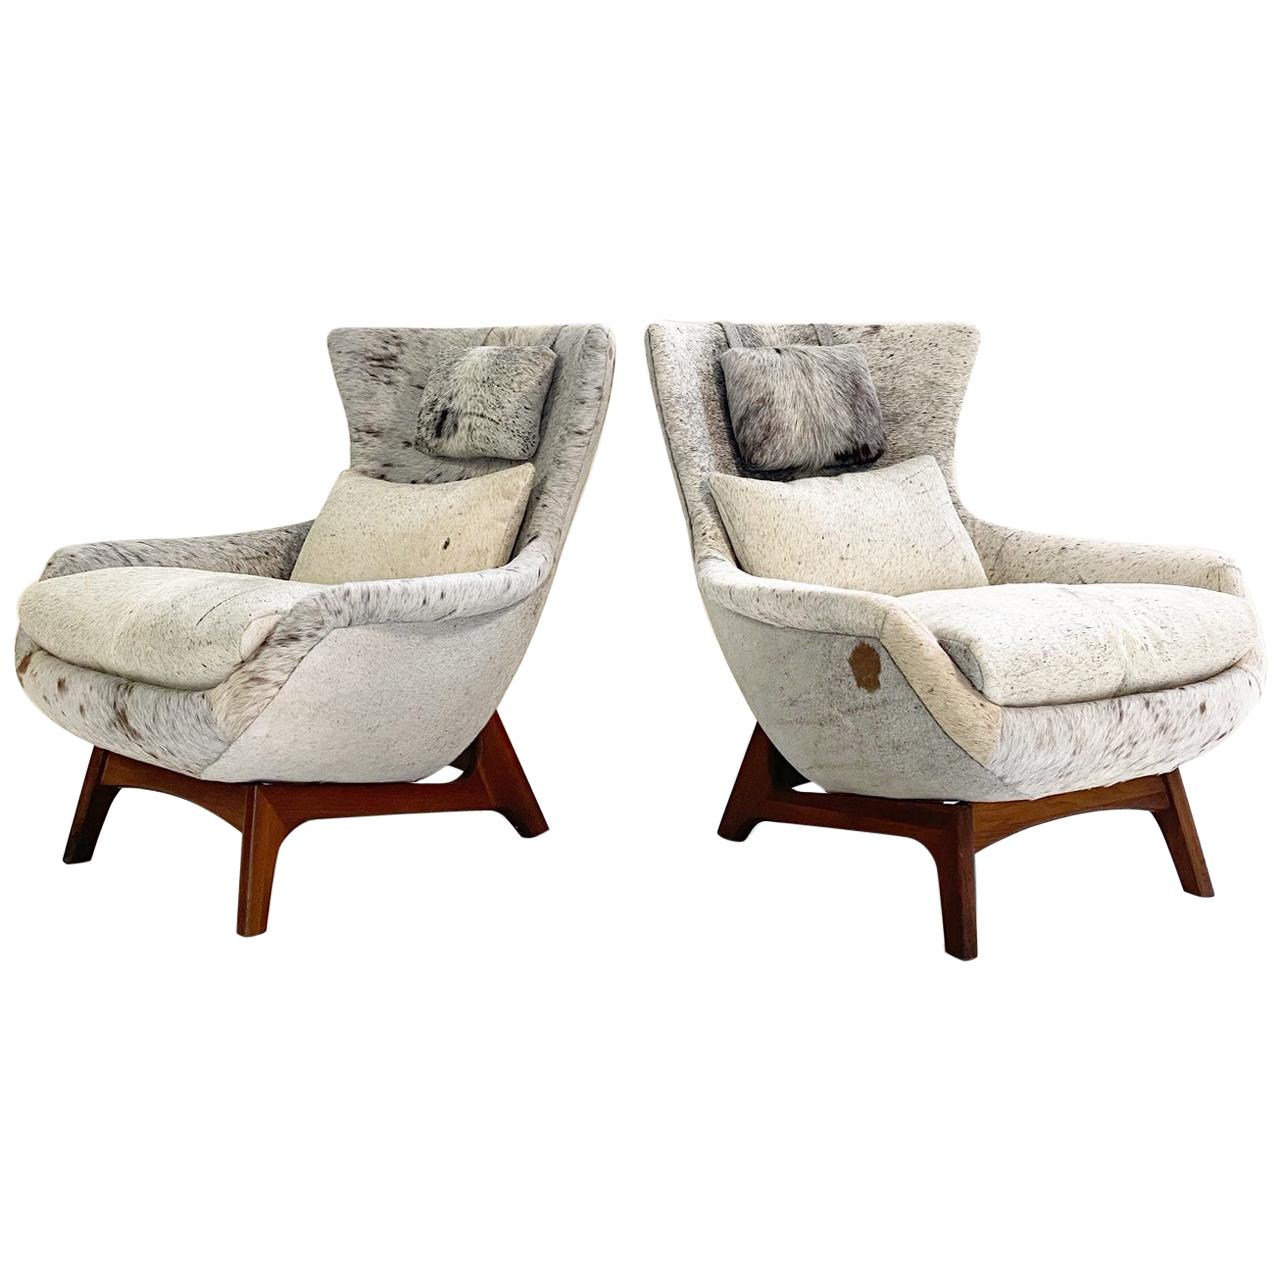 Adrian Pearsall Wingback Chairs Restored in Brazilian Cowhide